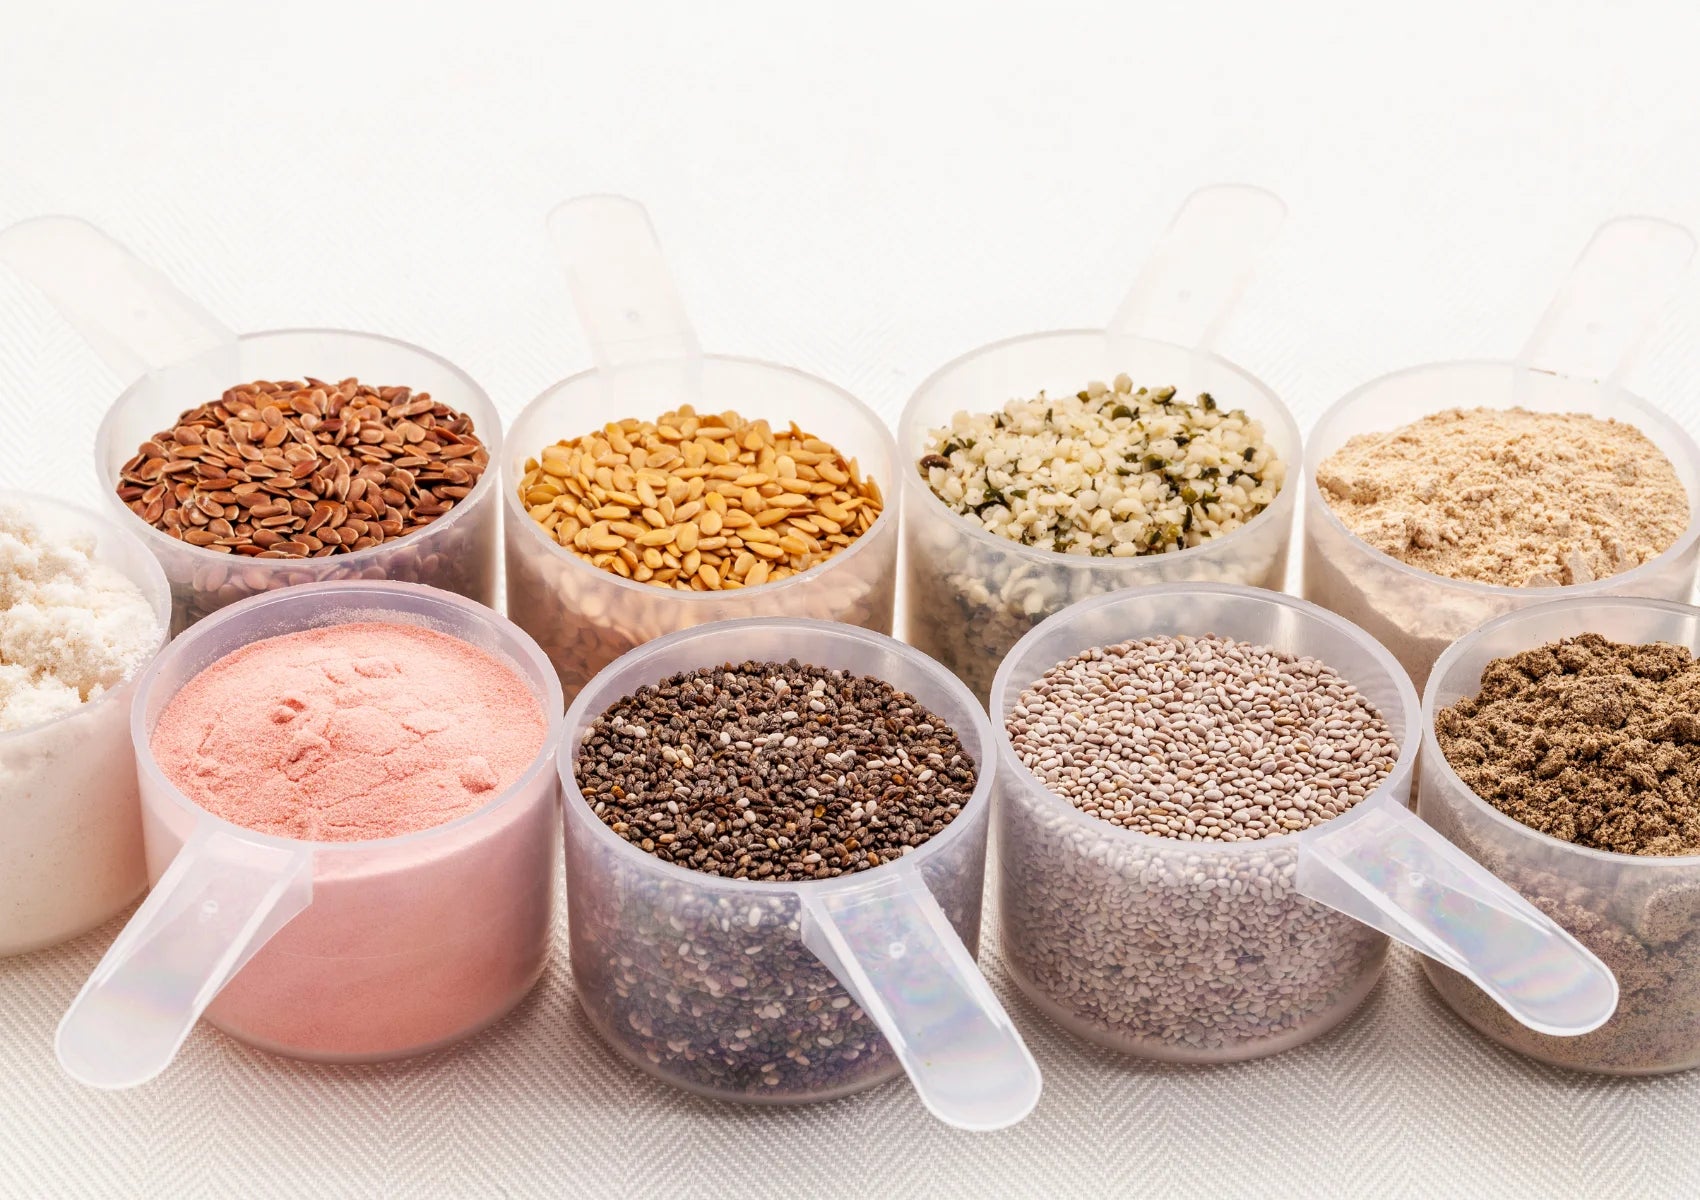 assortment of chia seeds, sunflower seeds, nuts and powders in scoops